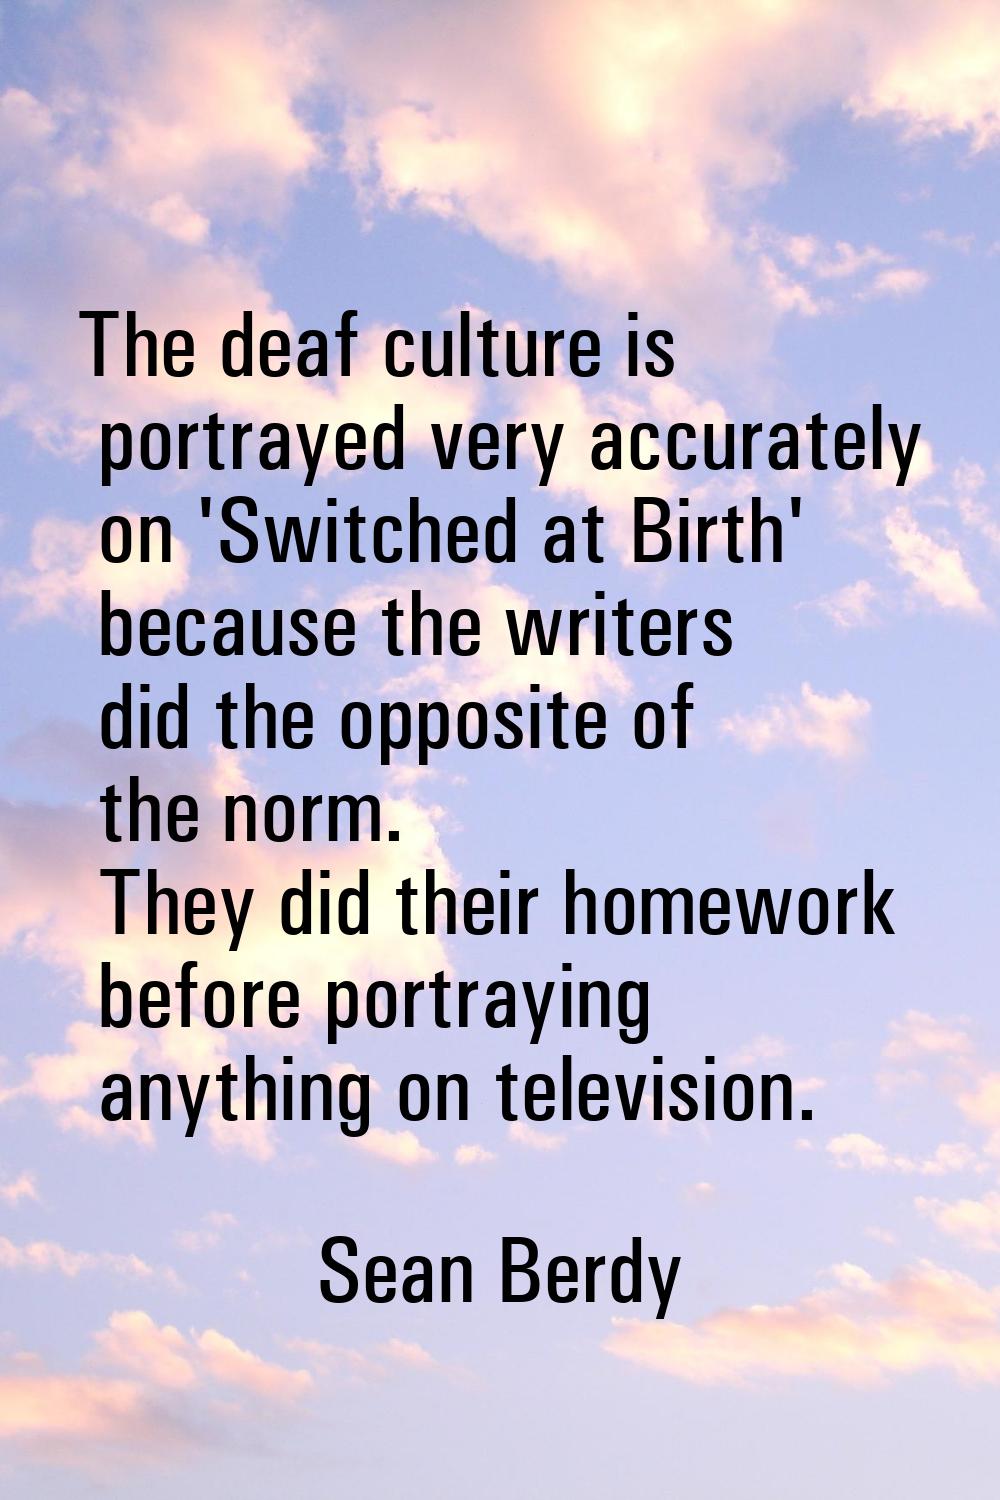 The deaf culture is portrayed very accurately on 'Switched at Birth' because the writers did the op